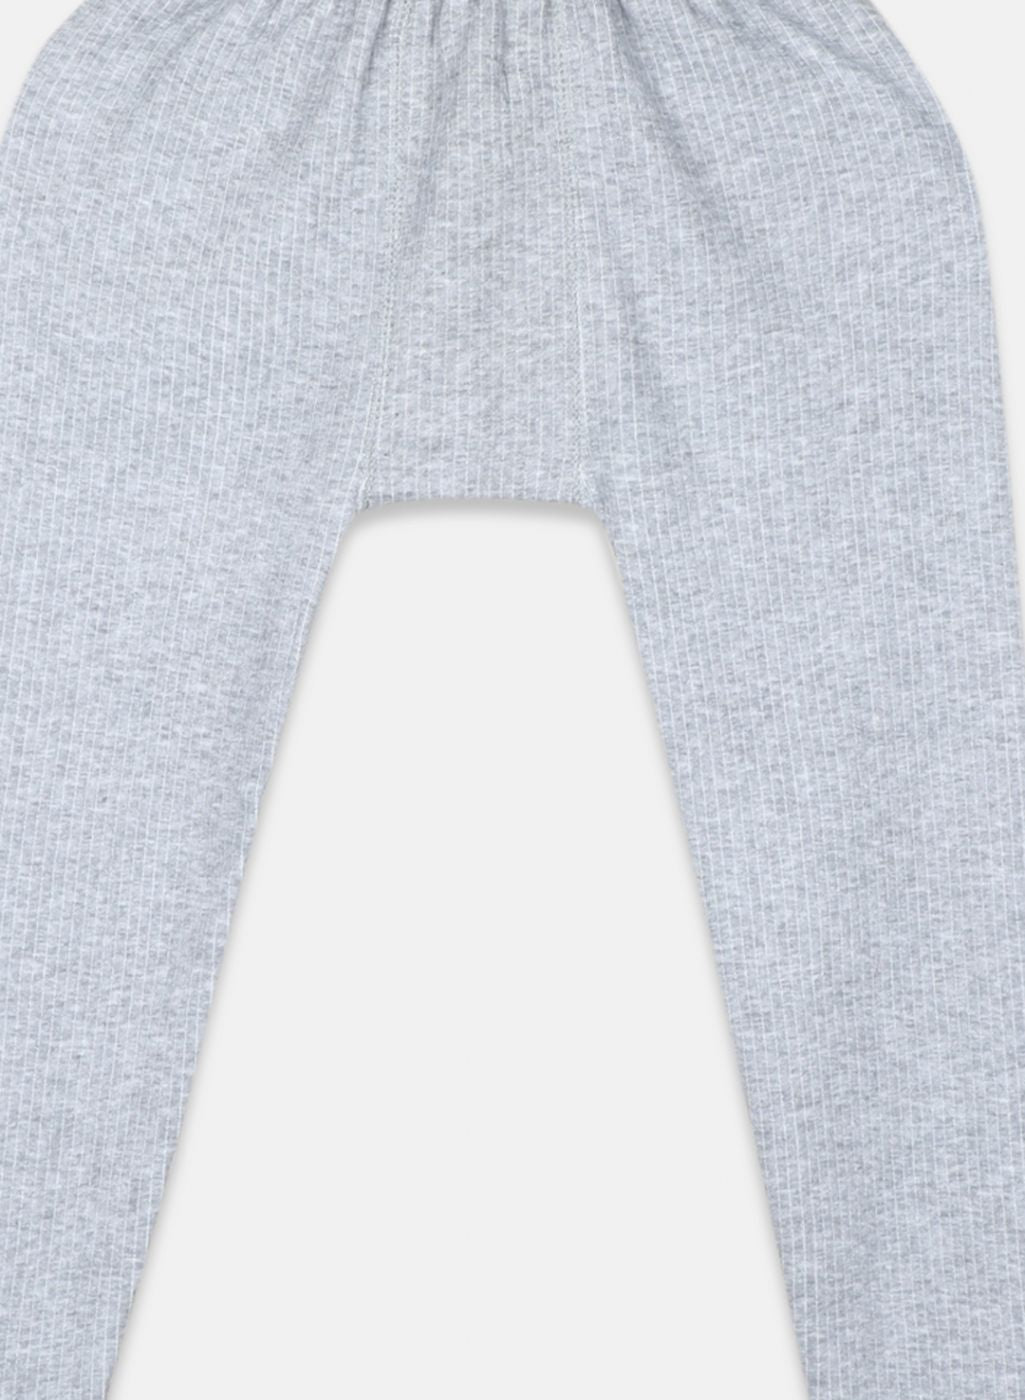 Boys Grey Solid Thermal Lower